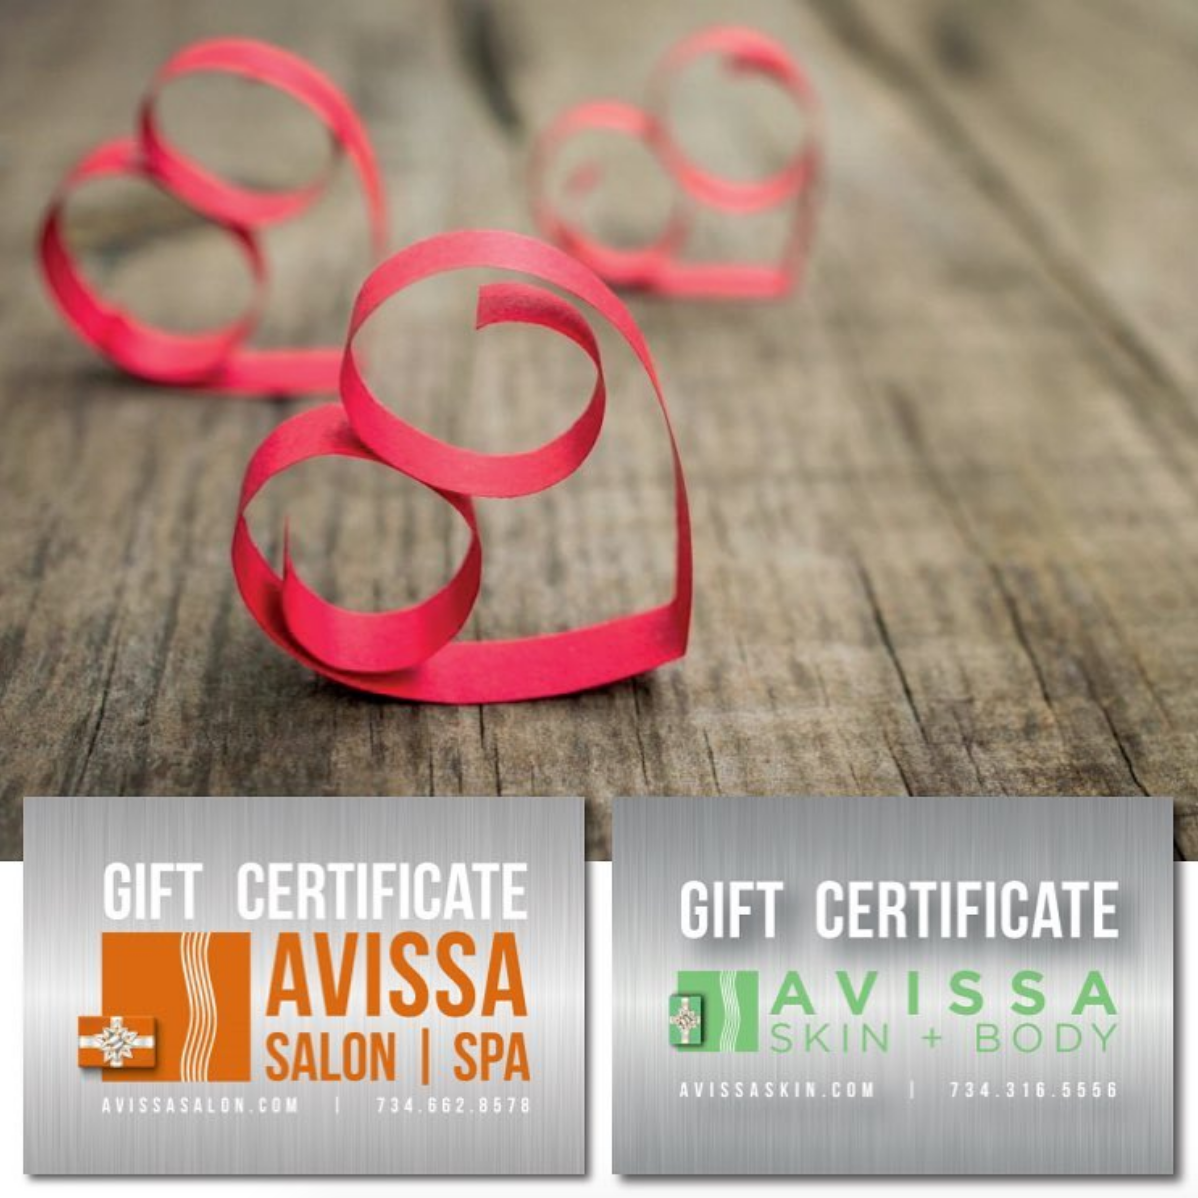 Salon | Spa Gift Certificates | Gift Cards http://www.avissasalon.com http://www.avissaskin.com